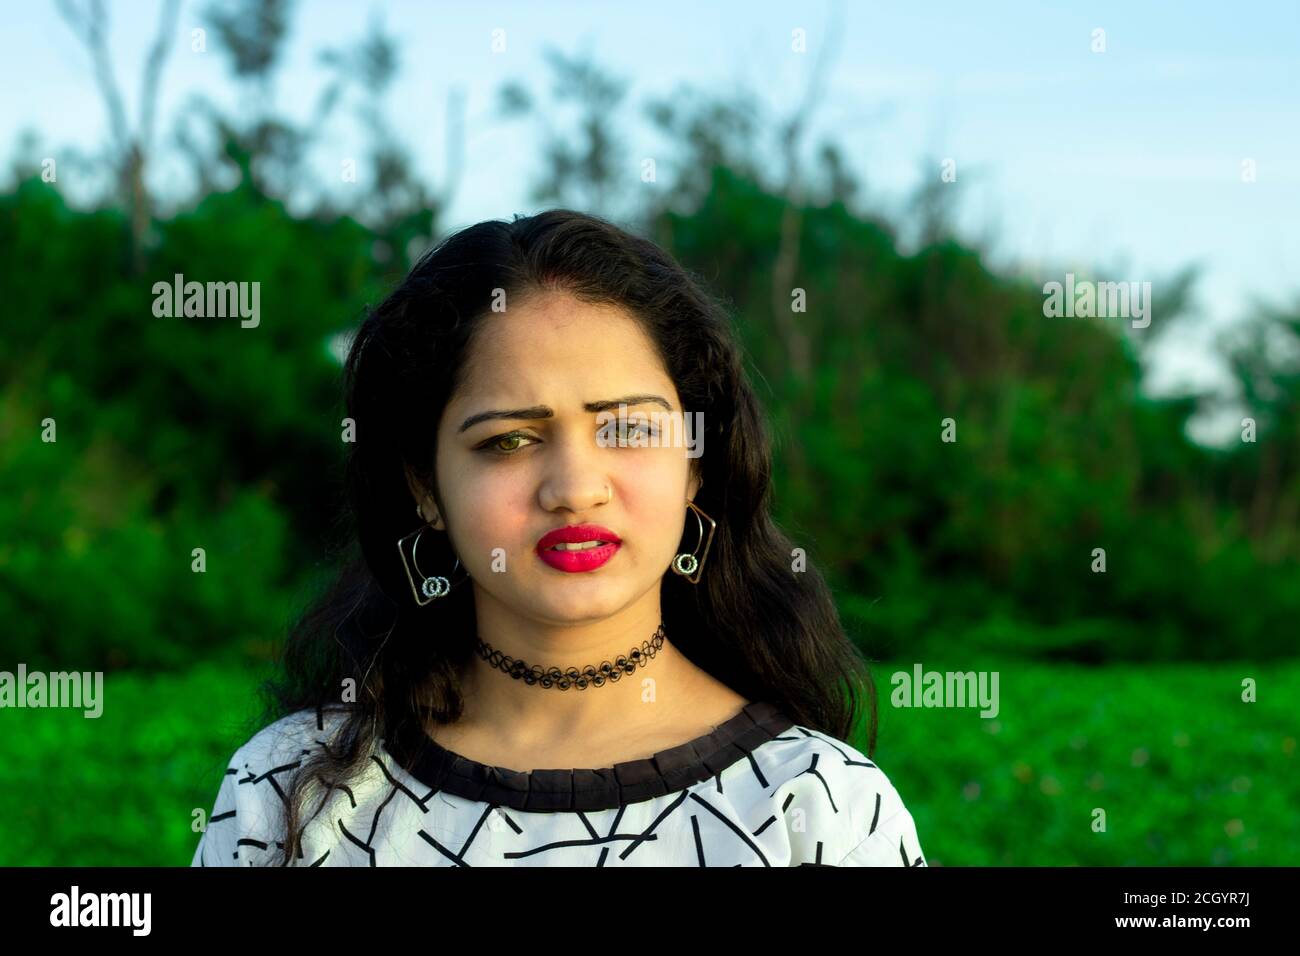 https://c8.alamy.com/comp/2CGYR7J/an-indian-model-with-closeup-beautiful-face-and-green-blurred-background-of-outside-trees-2CGYR7J.jpg